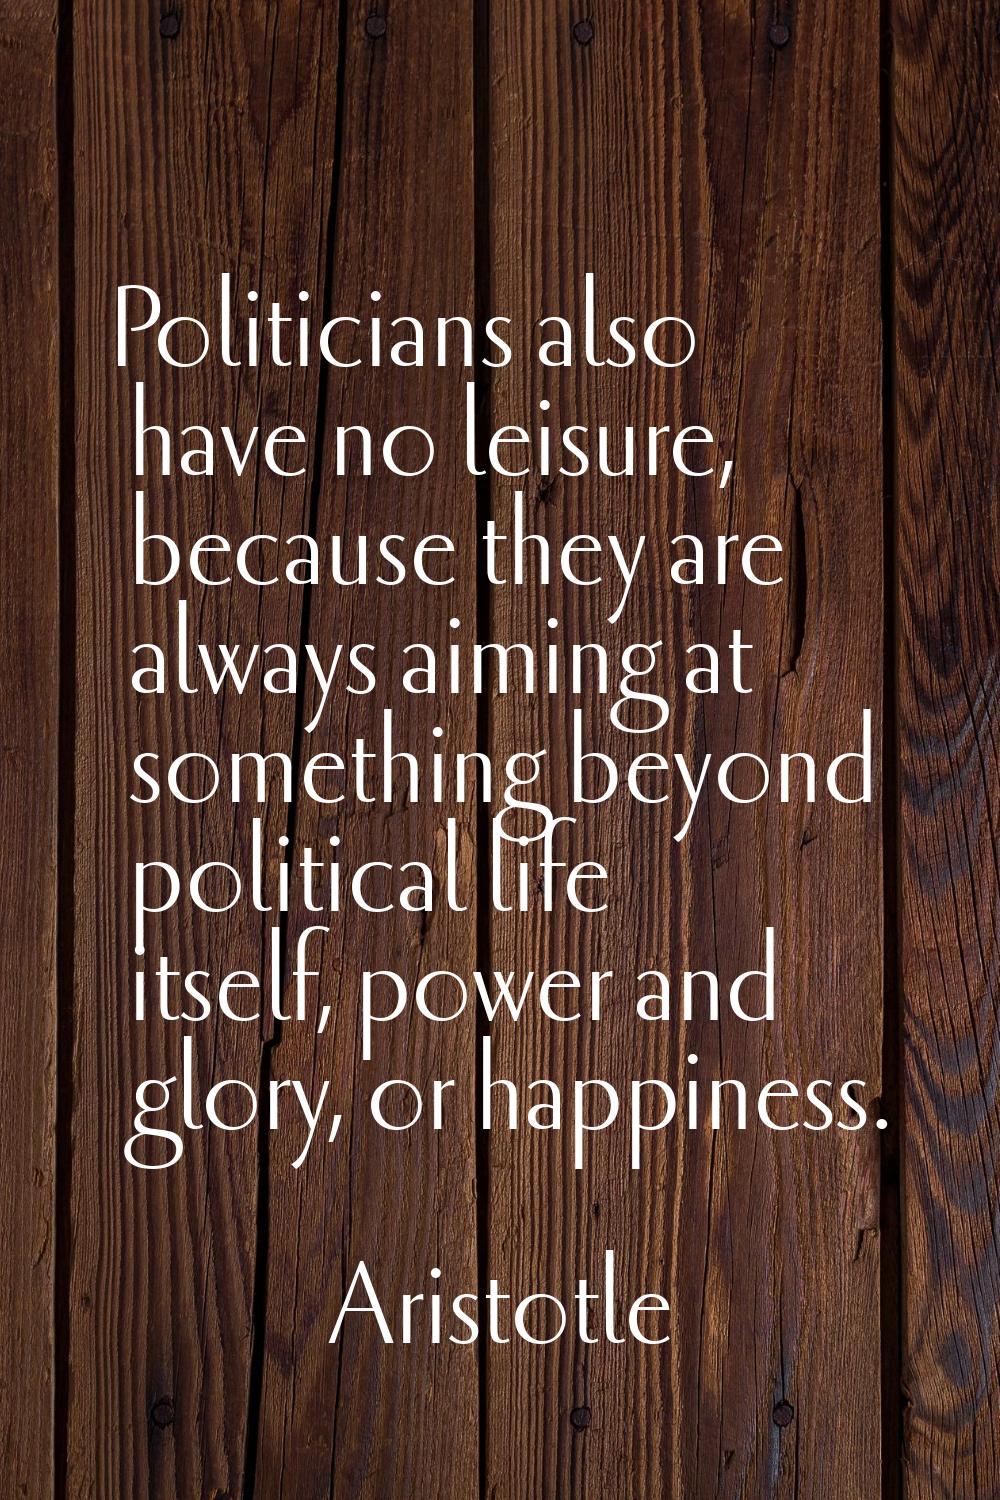 Politicians also have no leisure, because they are always aiming at something beyond political life